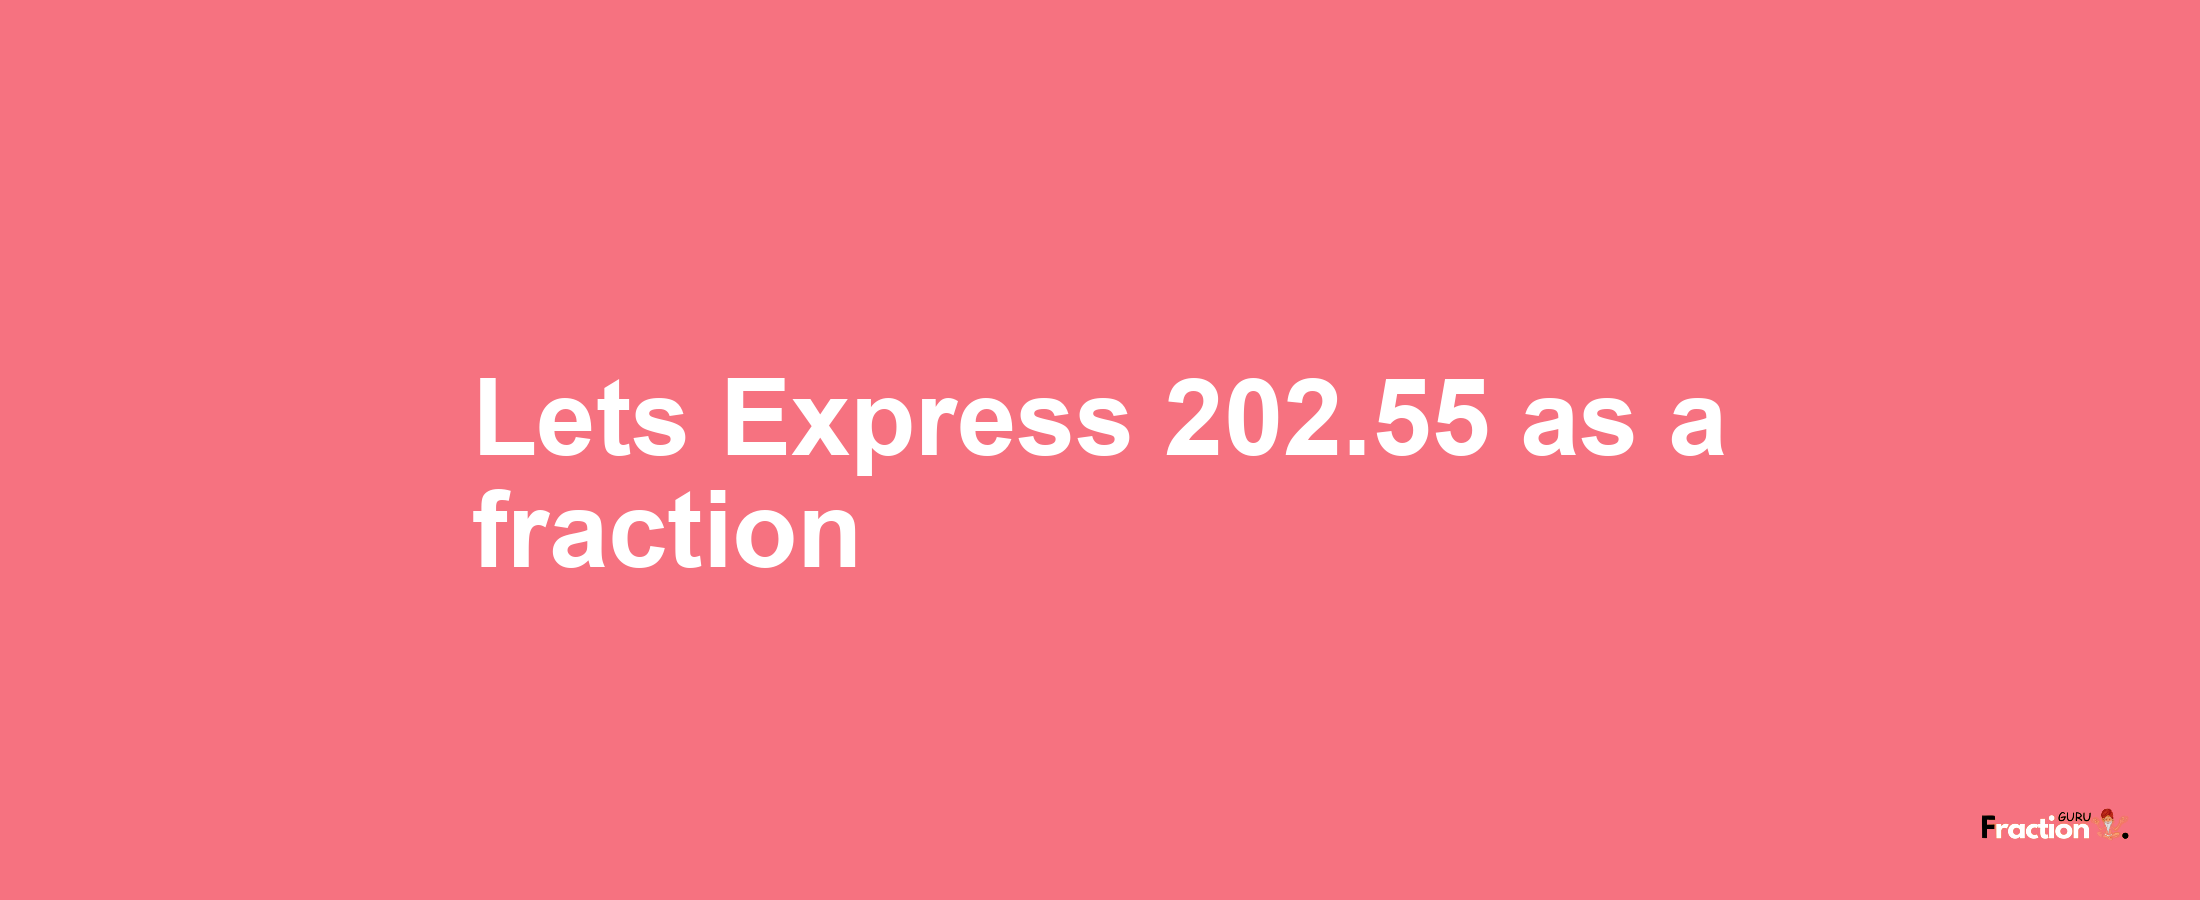 Lets Express 202.55 as afraction